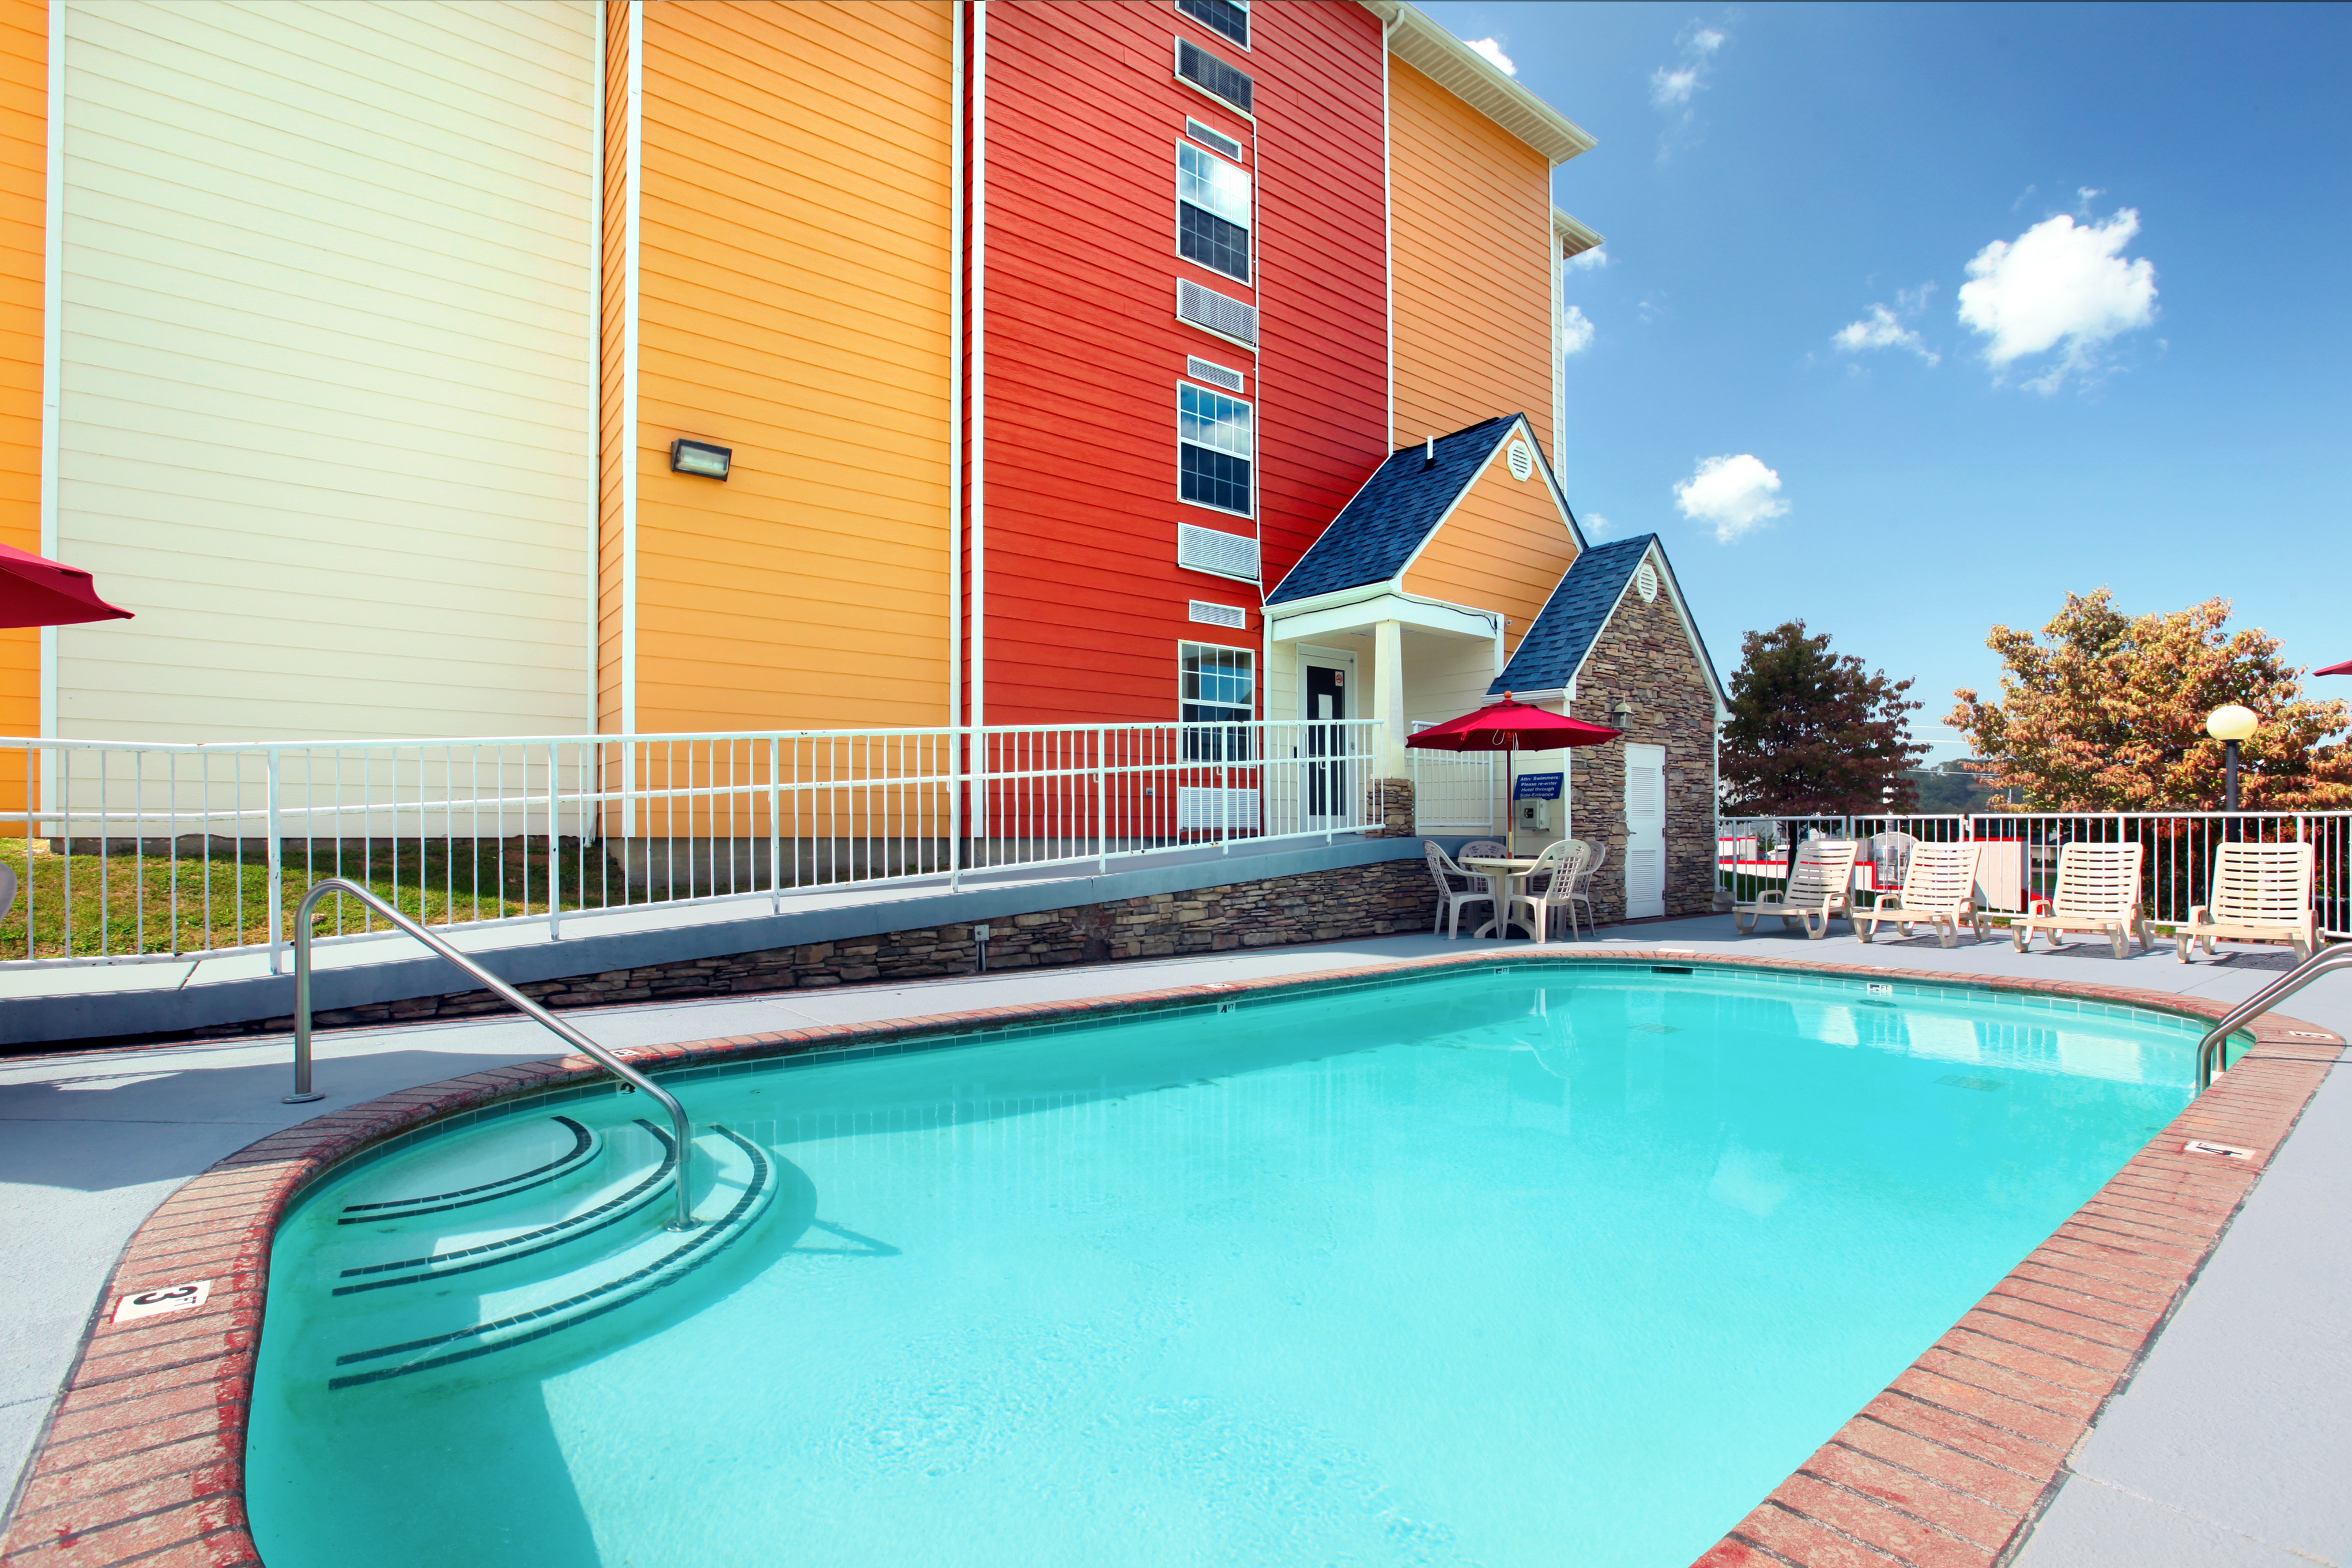 Microtel Inn And Suites Wyndham In Pigeon Forgethe Official Pigeon Forge